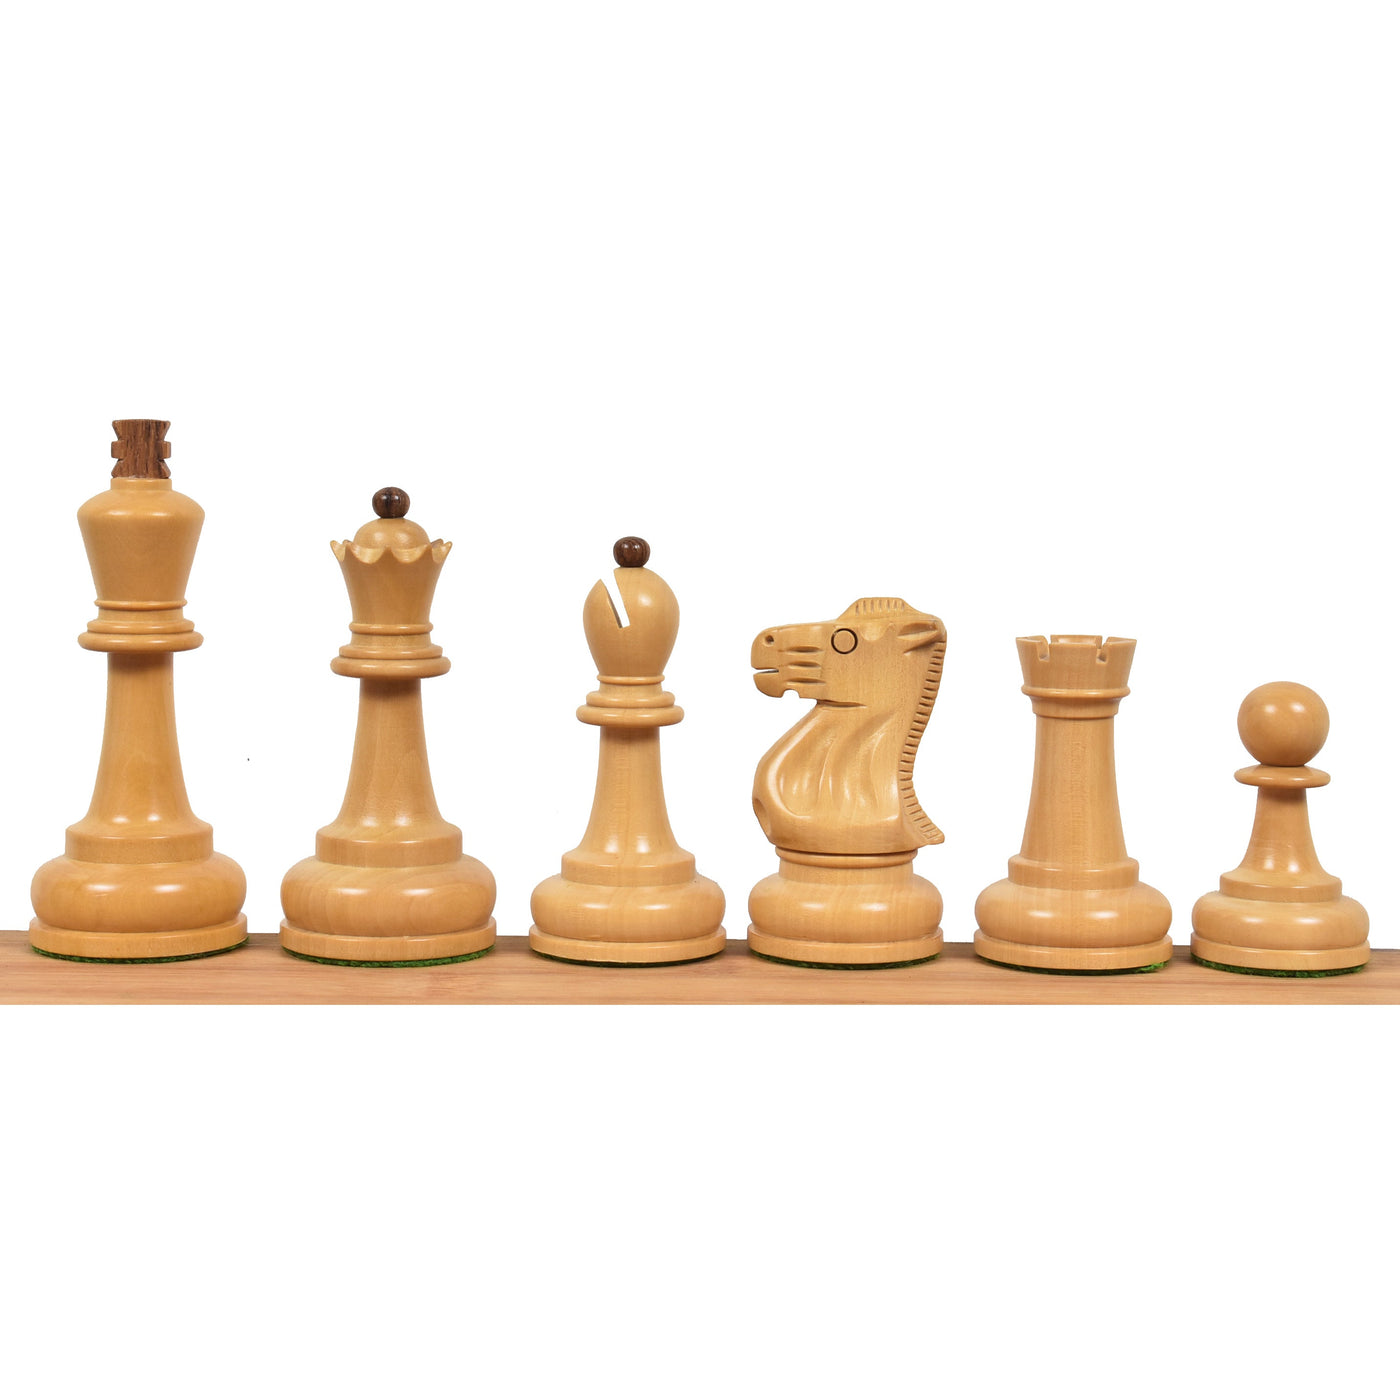 3.7" Soviet Großmeister Supreme Chess Set - Chess Pieces Only- Weighted Golden Rosewood